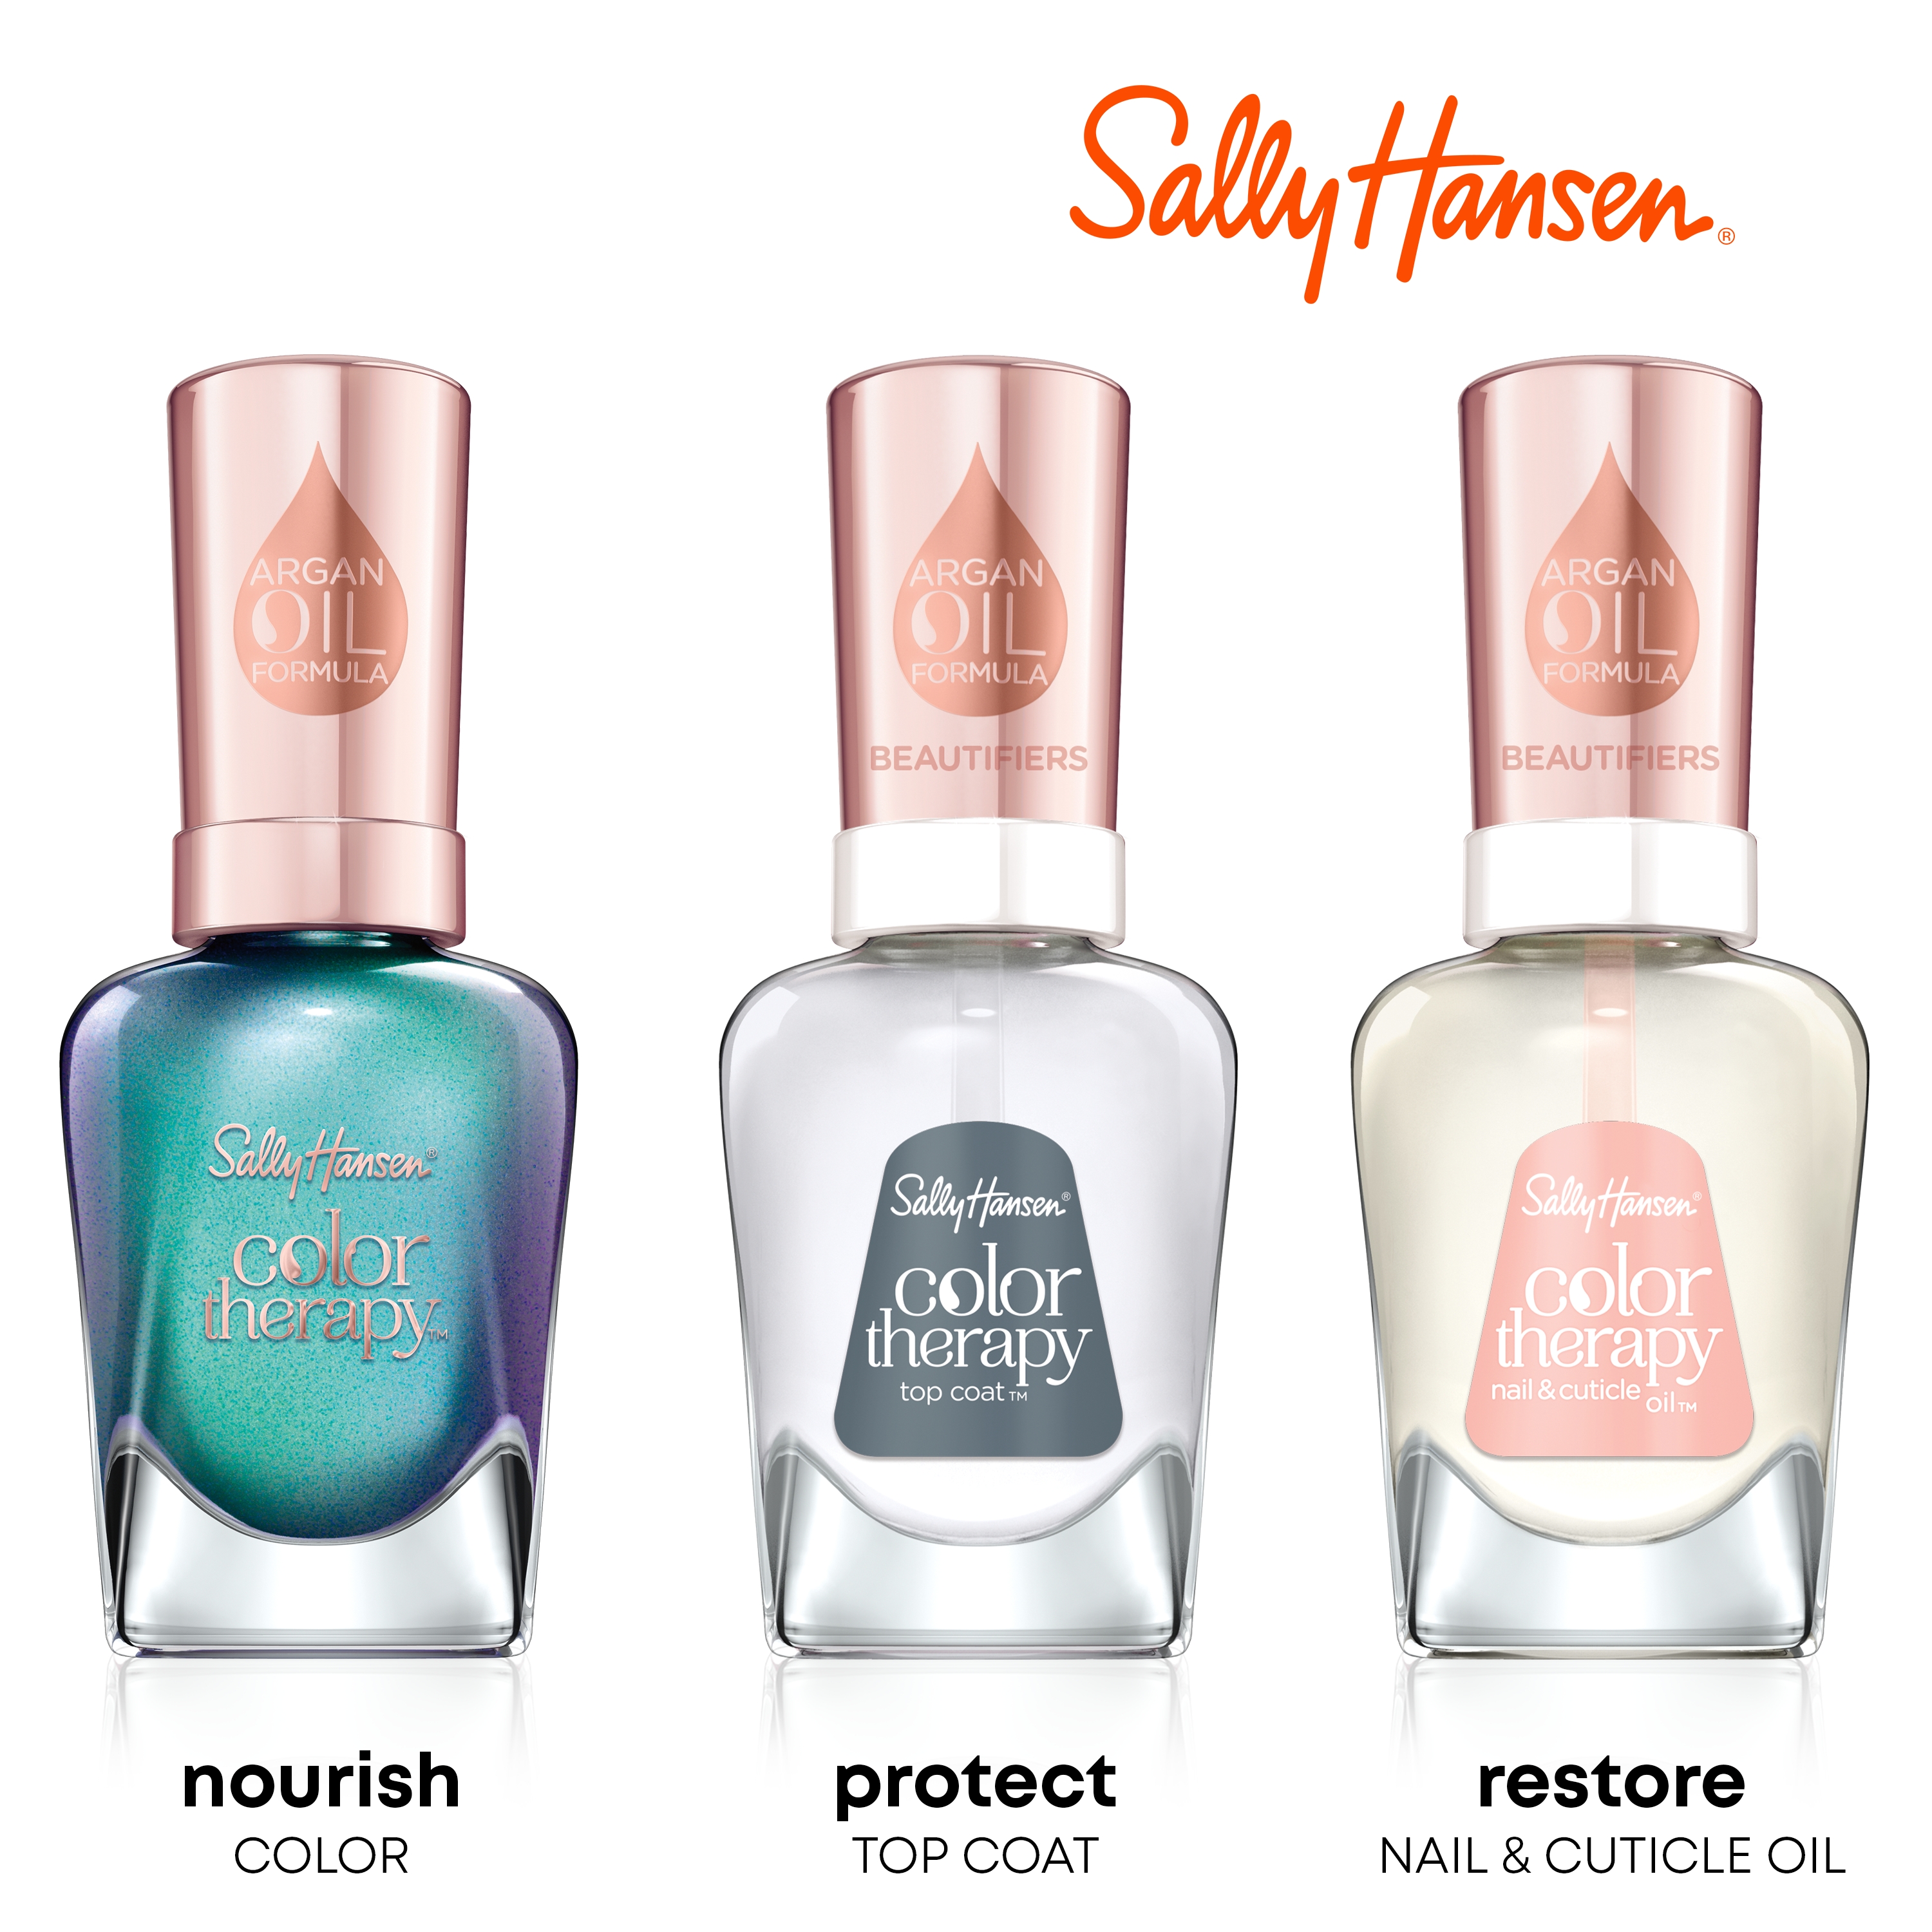 Sally Hansen Color Therapy Nail Color, Oceans Away, 0.5 oz, Color Nail Polish, Nail Polish, Nail Polish Colors, Restorative, Argan Oil Formula, Instantly Moisturizes - image 5 of 13